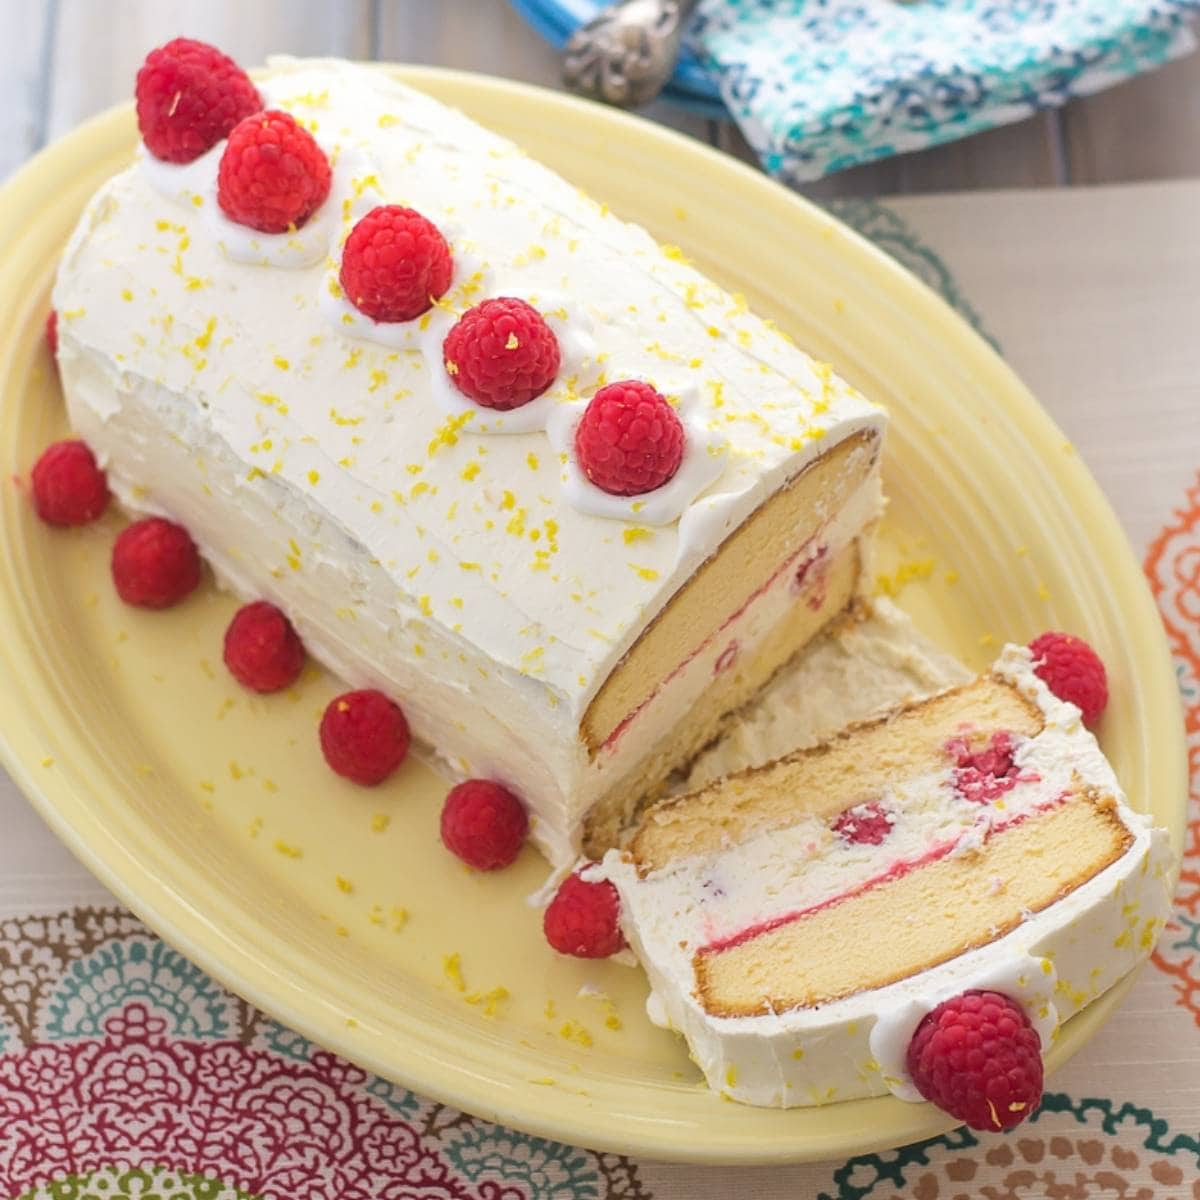 Raspberry and Lemon curd ice box cake on a serving platter.